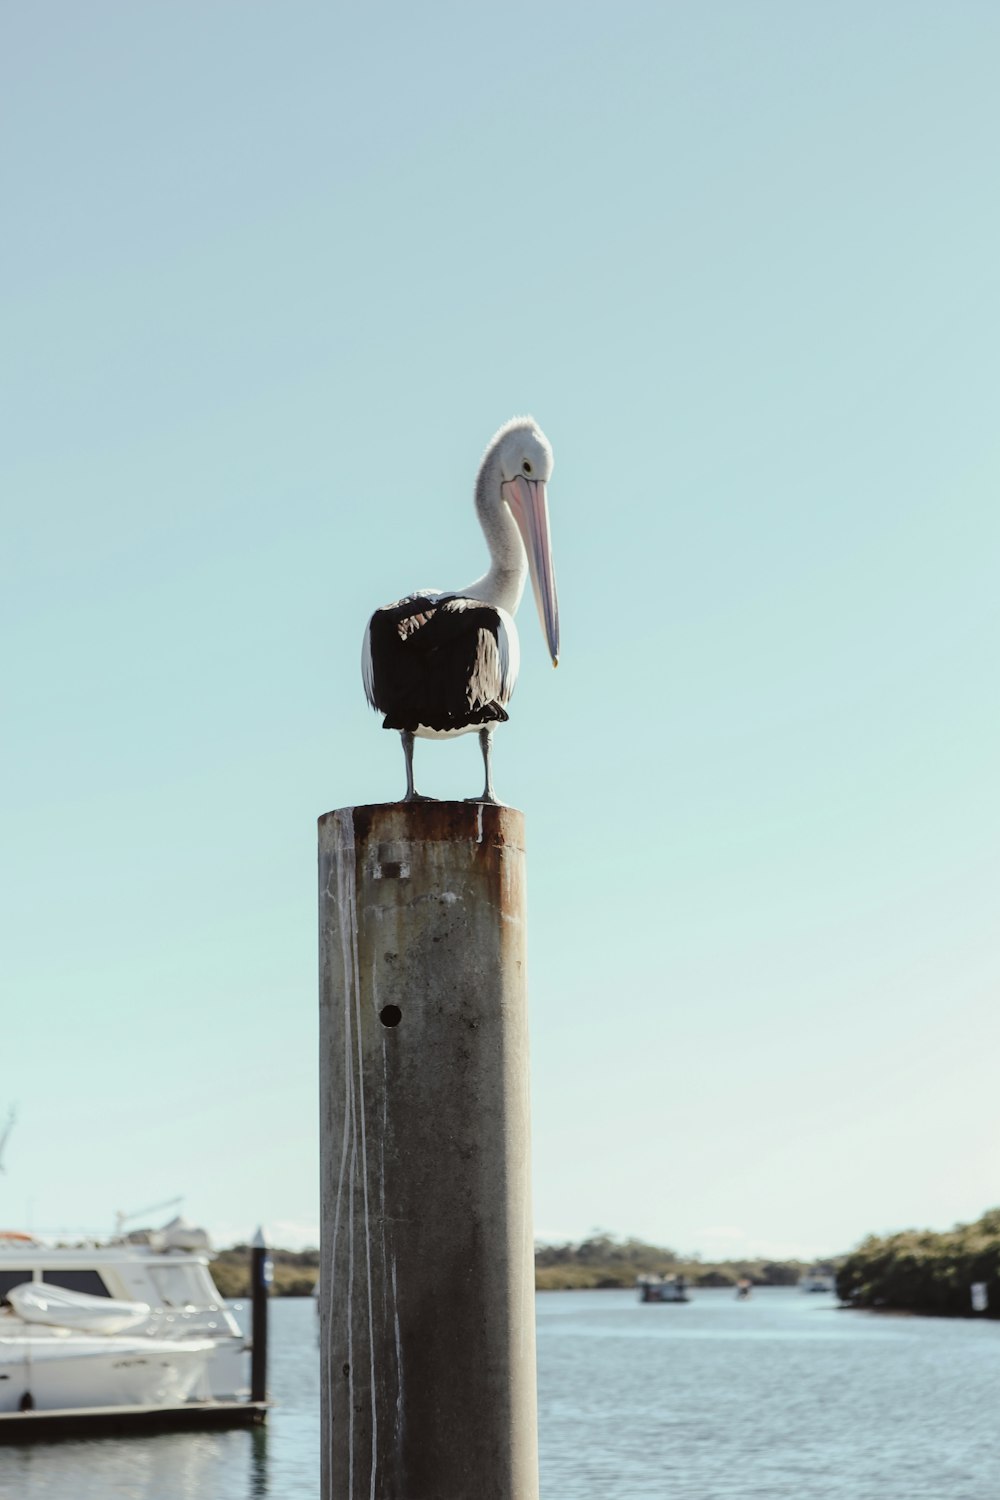 black and white pelican on brown wooden post under blue sky during daytime